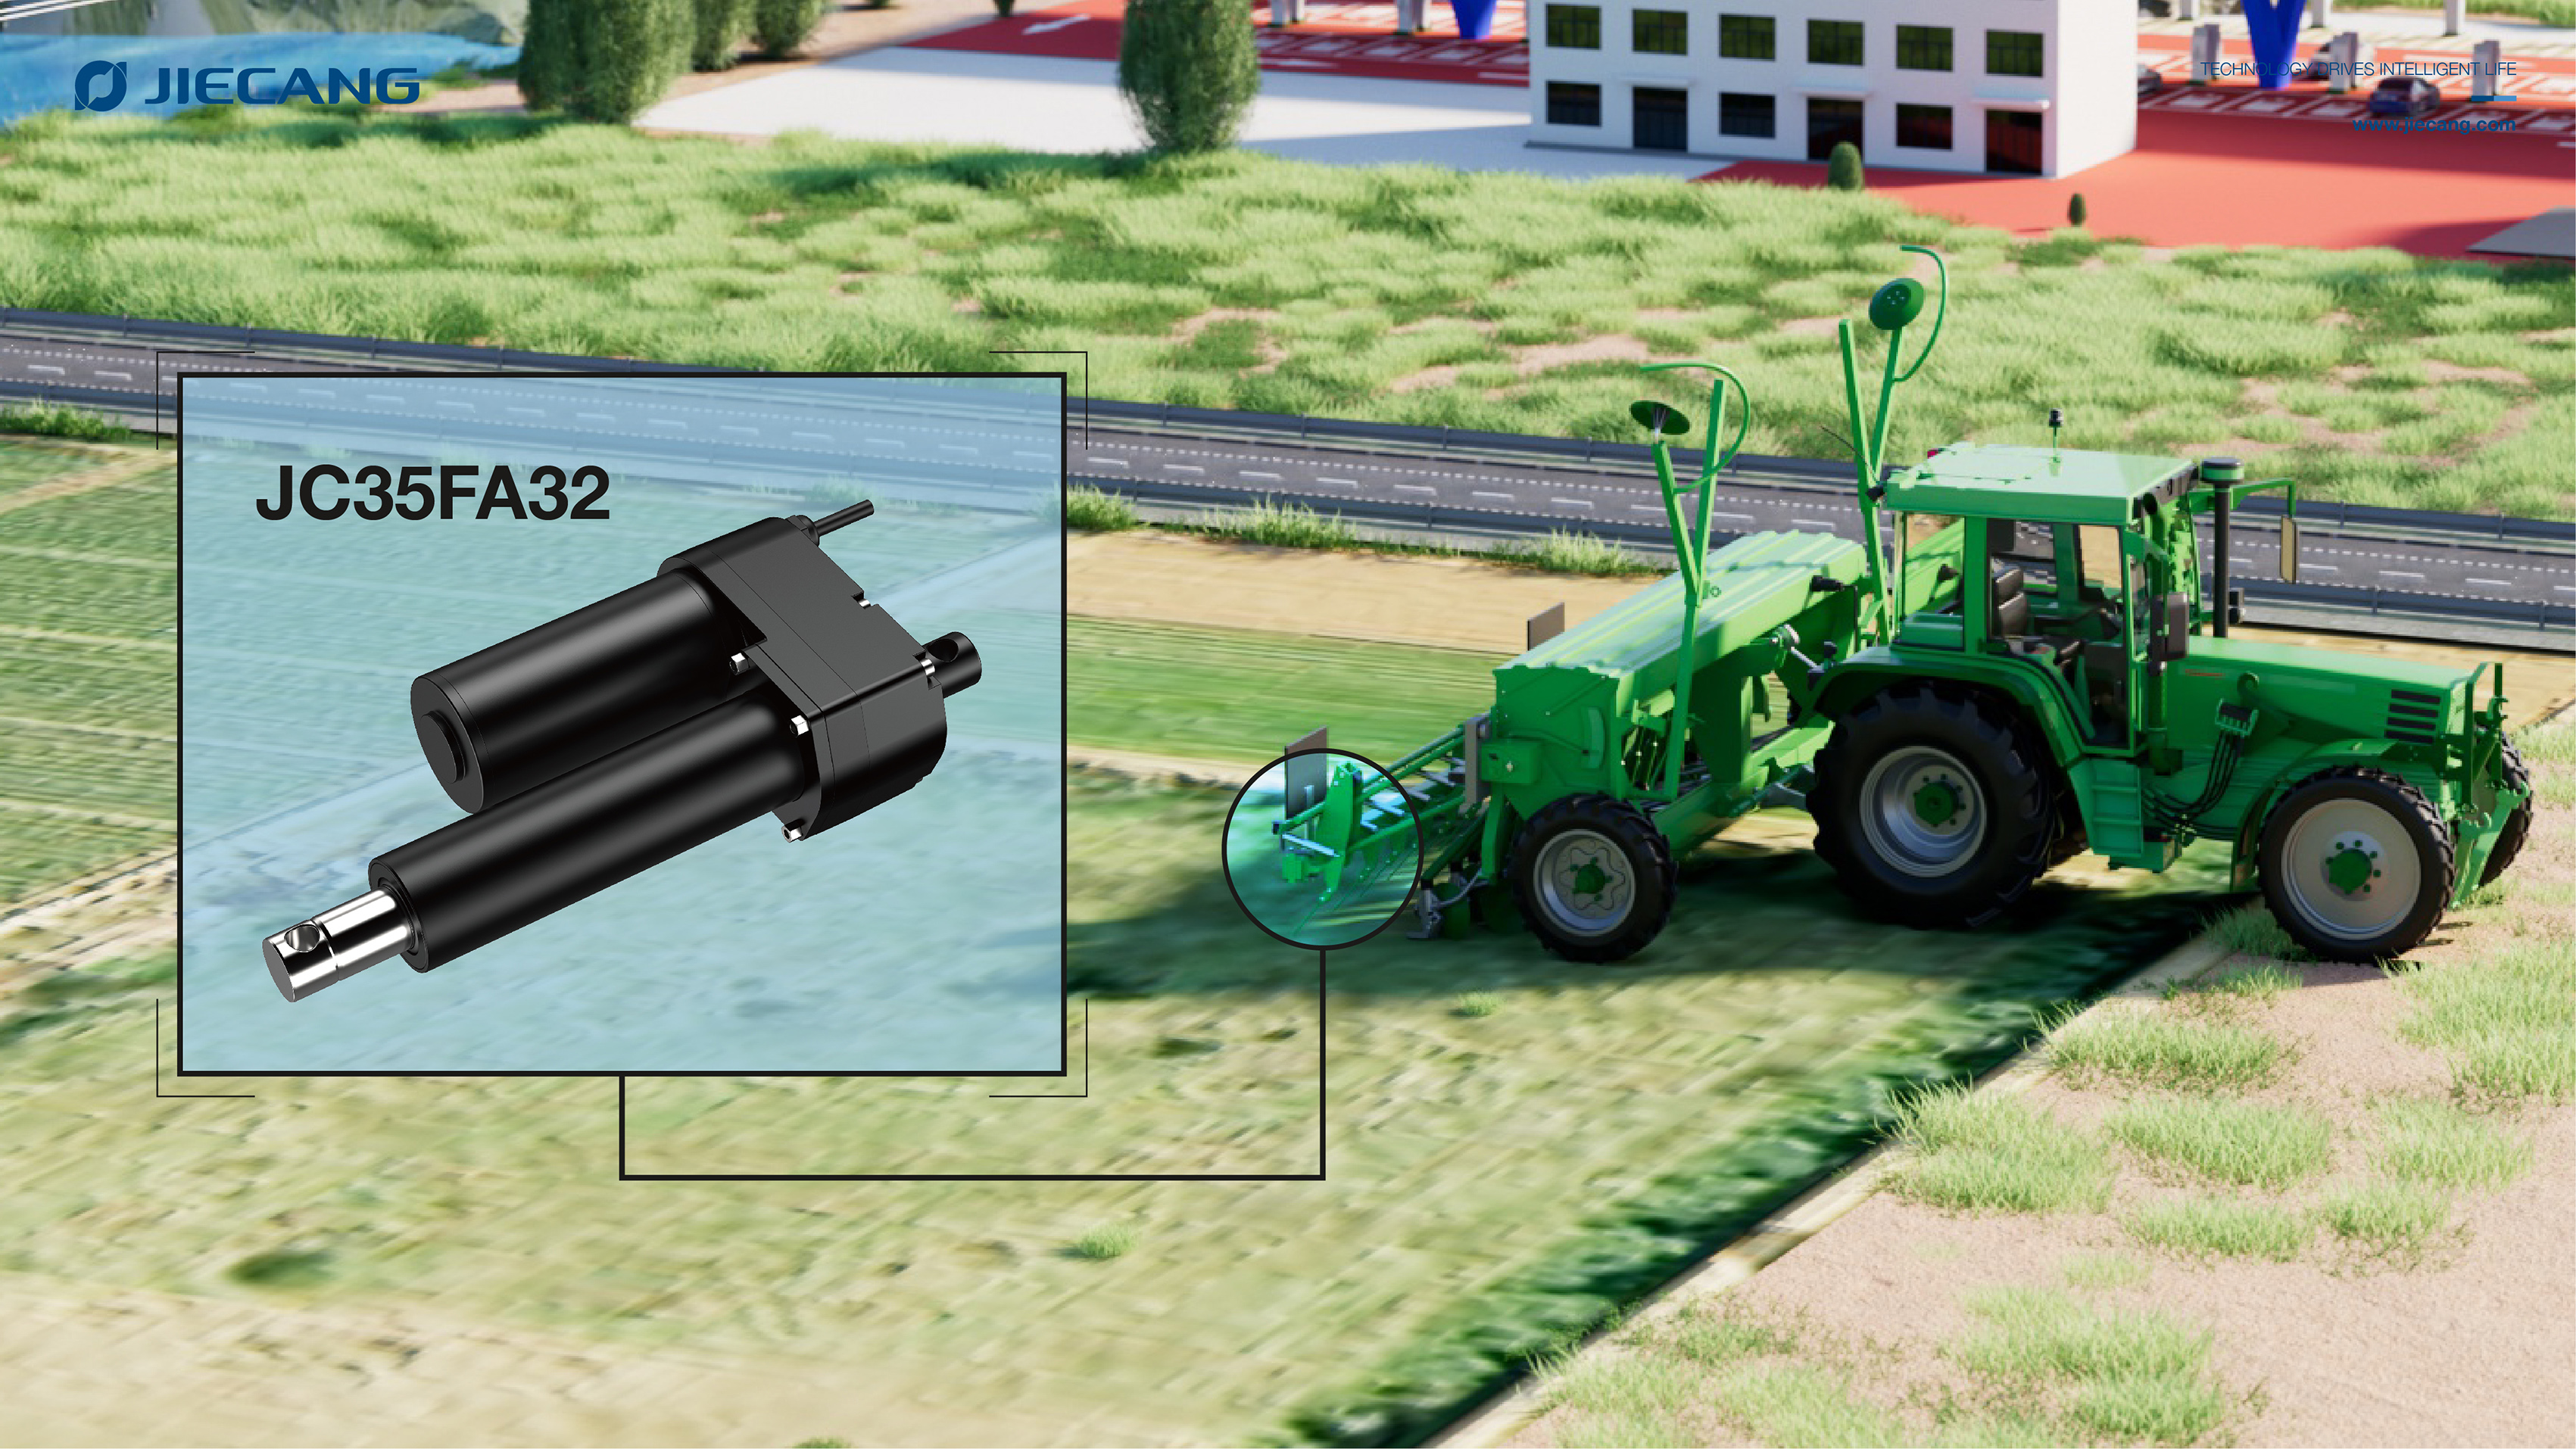 linear actuator applications in agriculture